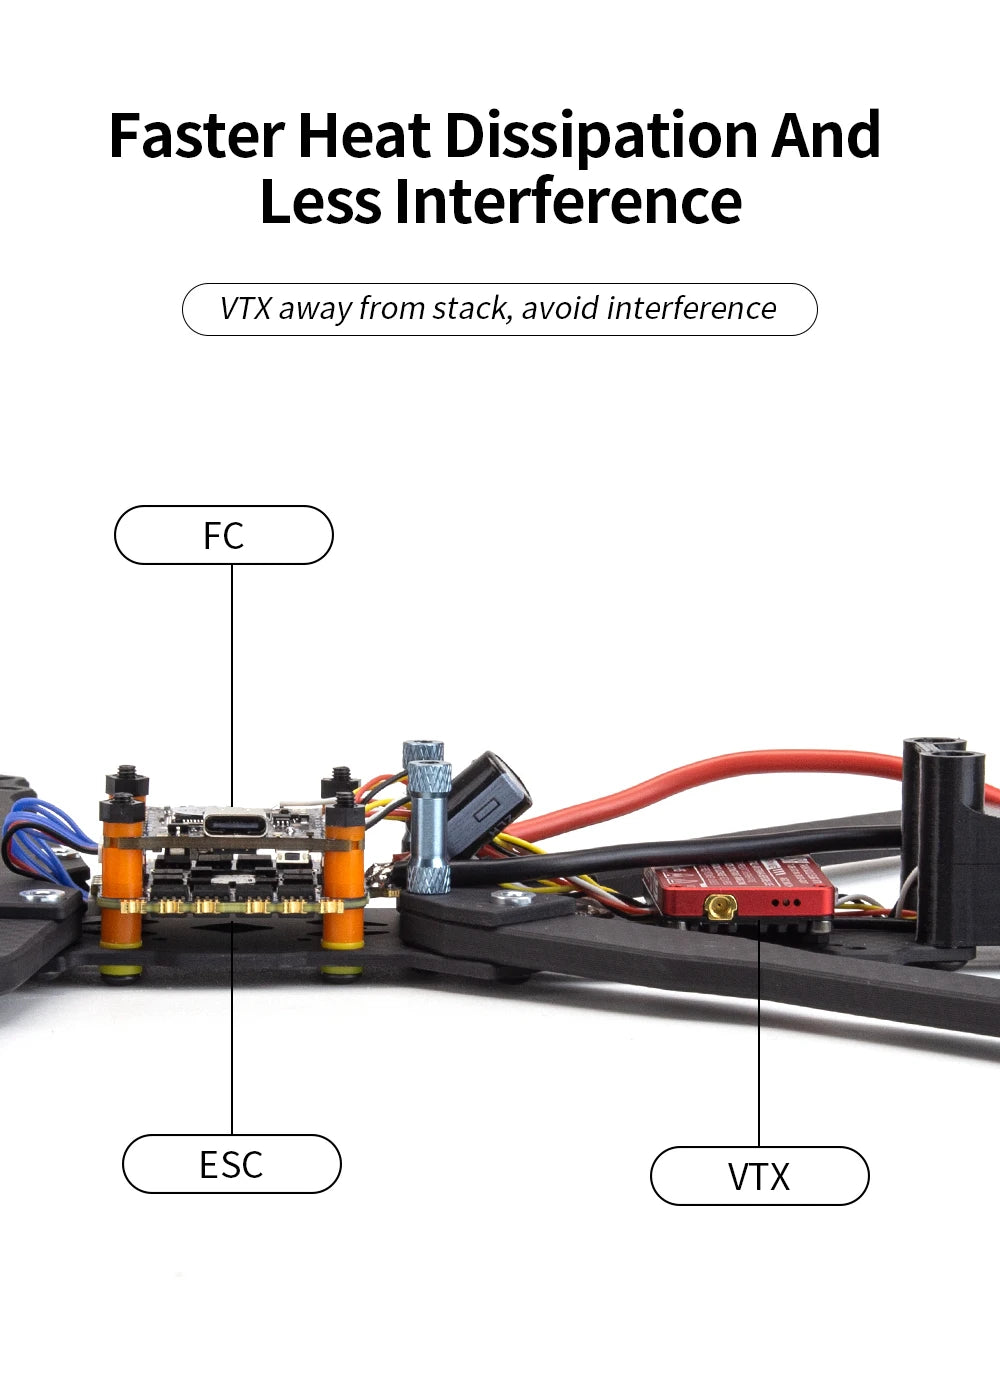 ATOMRC Insight7, Faster Heat Dissipation And Less Interference VTX away from stack